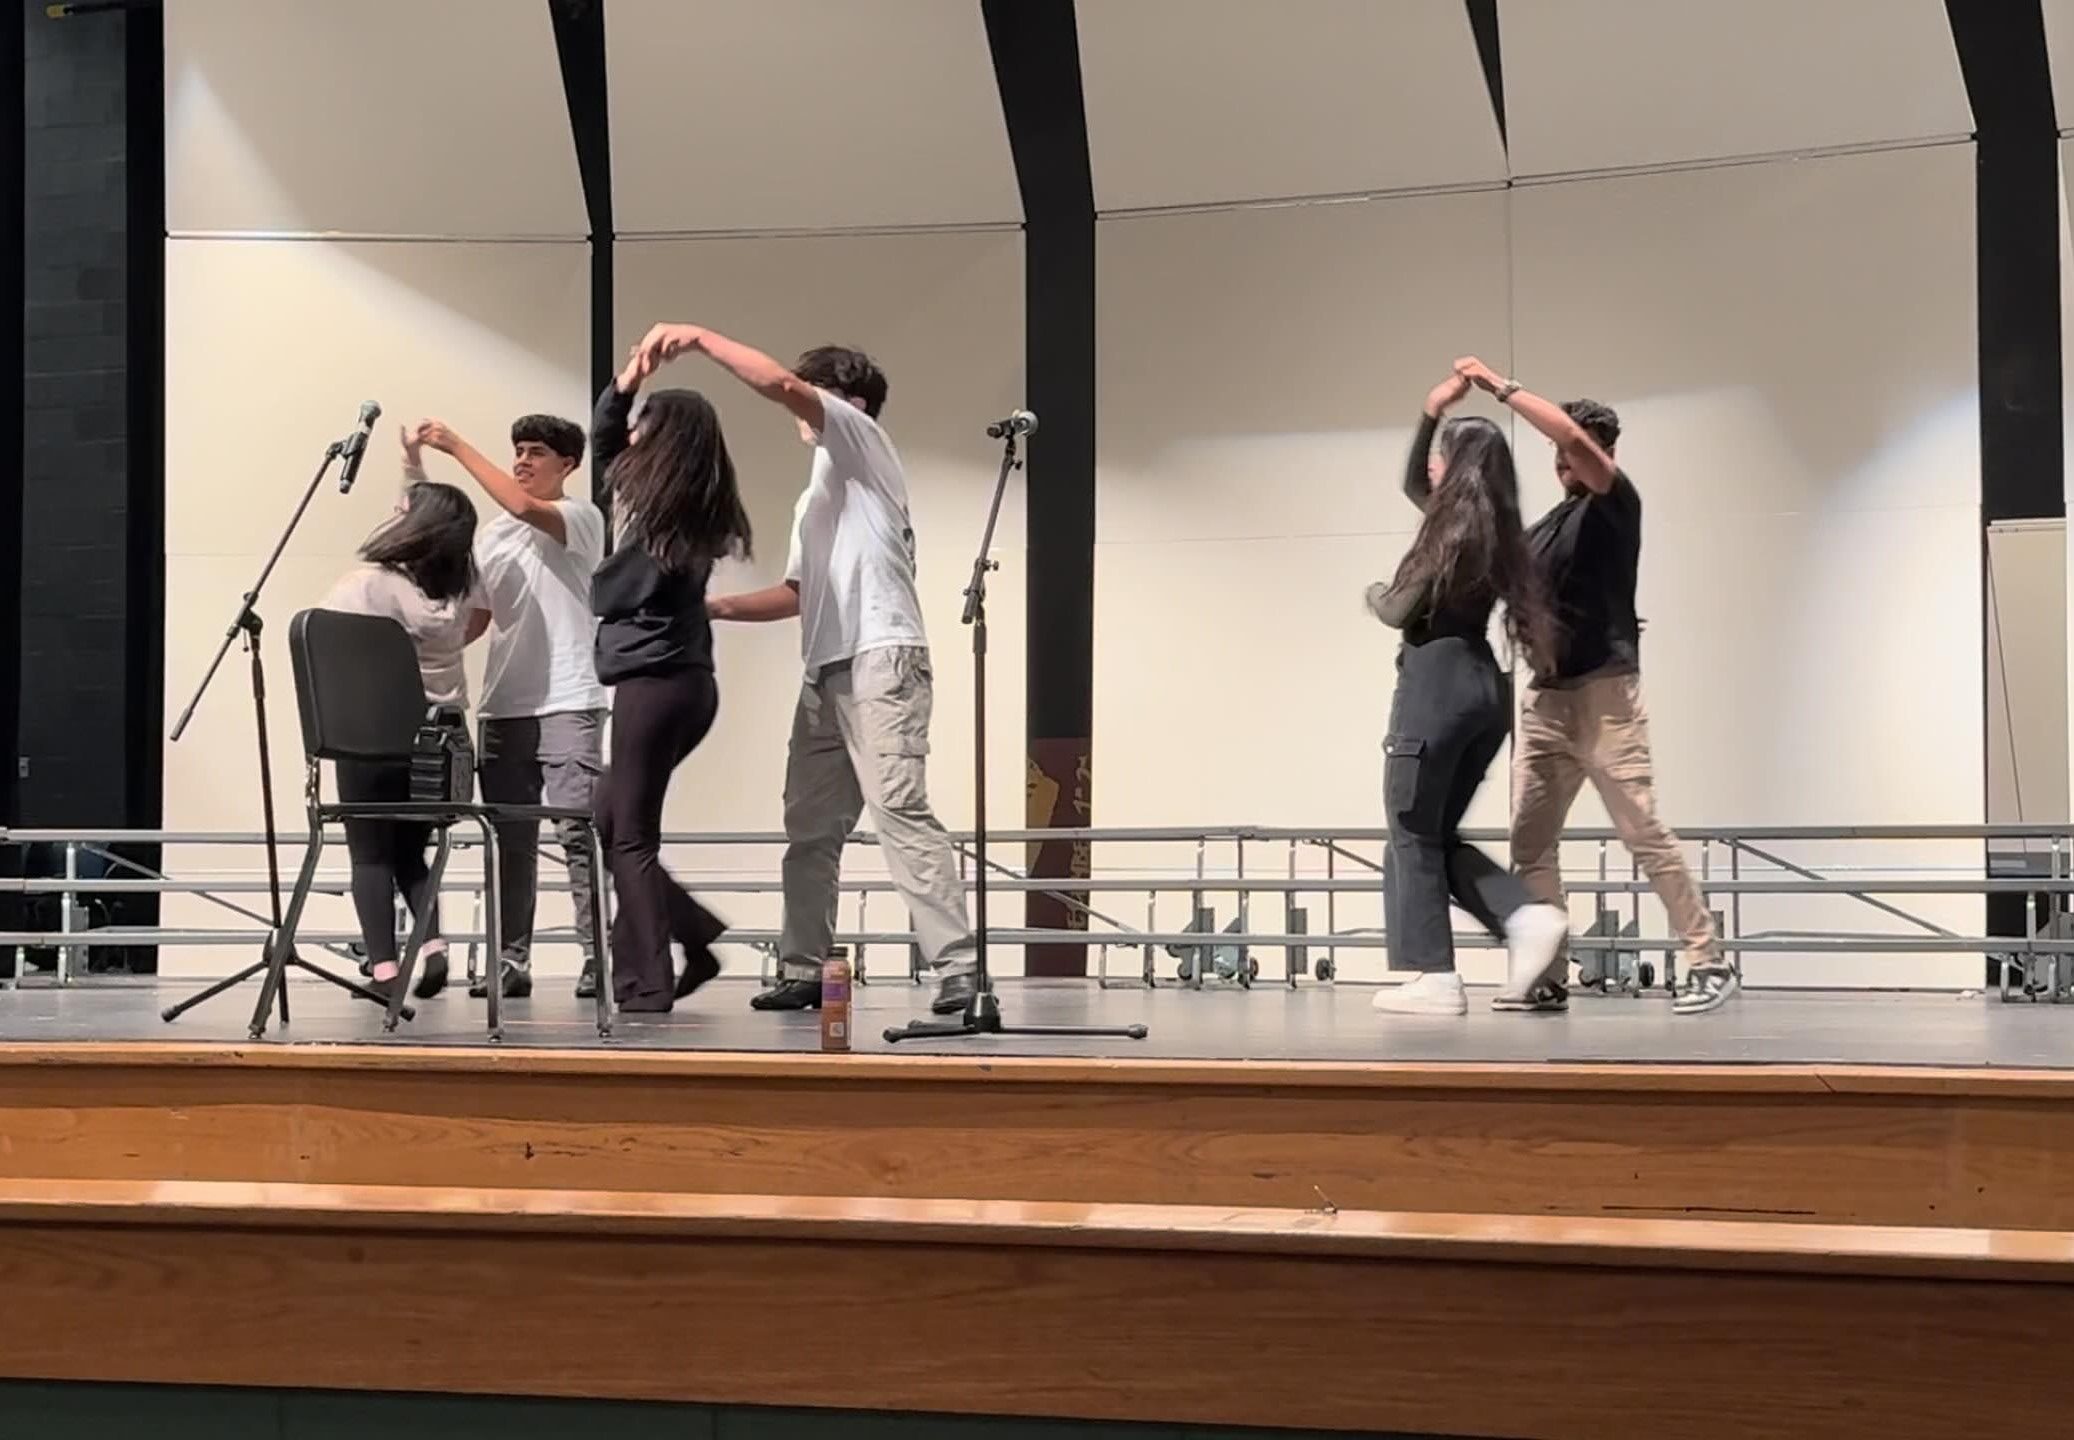 Pasion Latino practices their dance performance after school on the auditorium stage. Im very excited to show what weve prepared to the school, senior Luis Andres Munoz said.